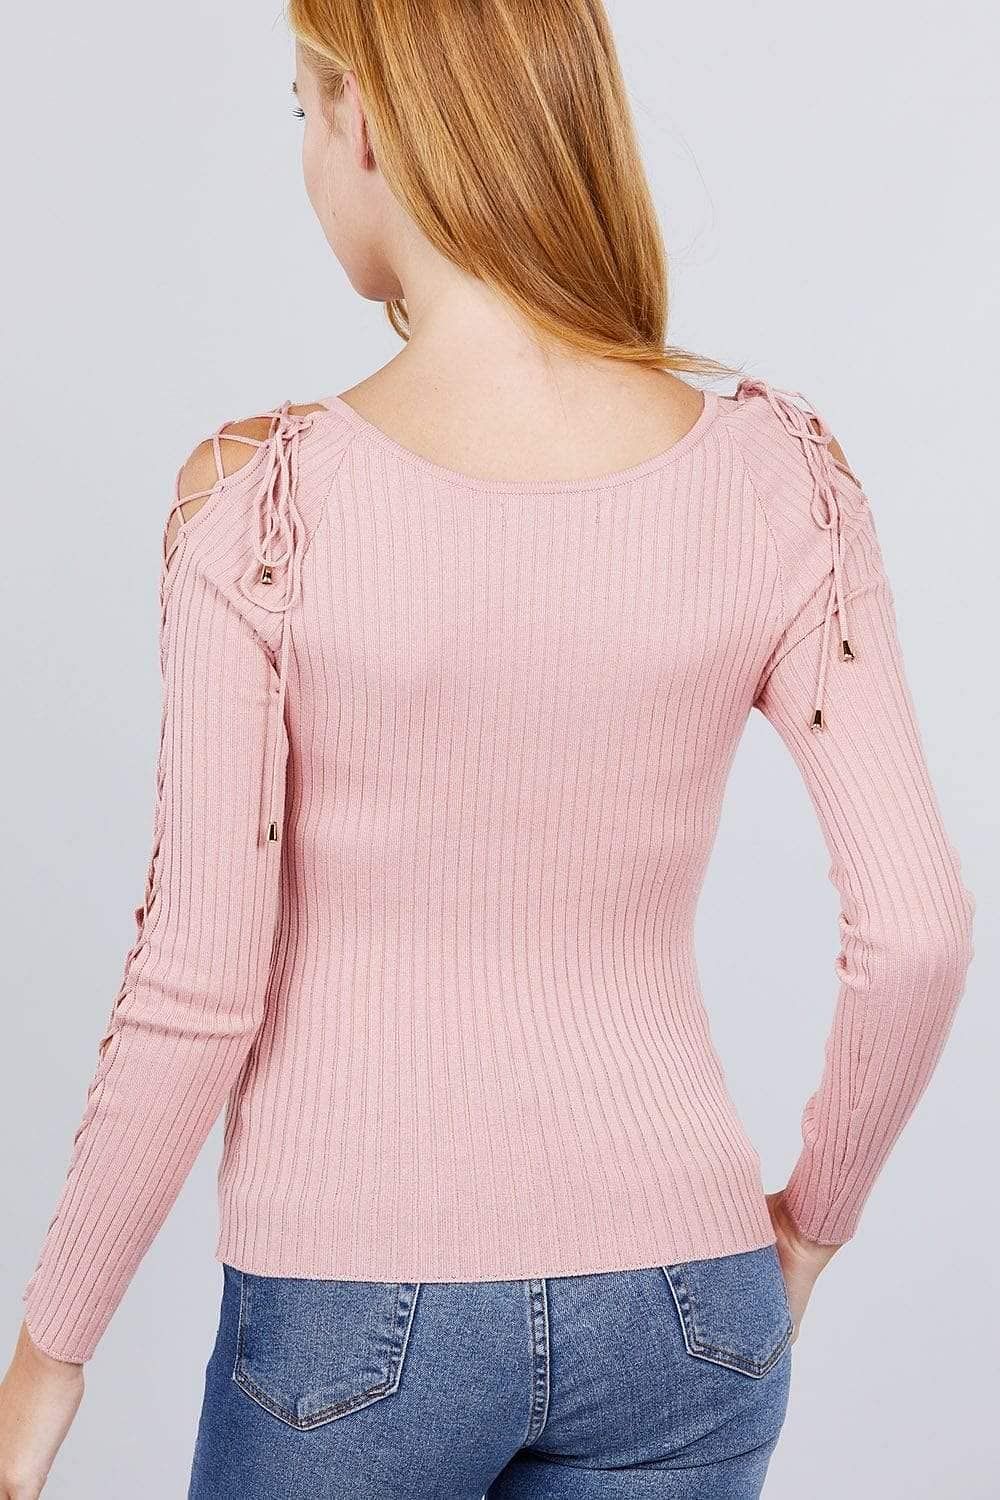 Pink Long Sleeve Scoop Neck Top - Shopping Therapy L Top